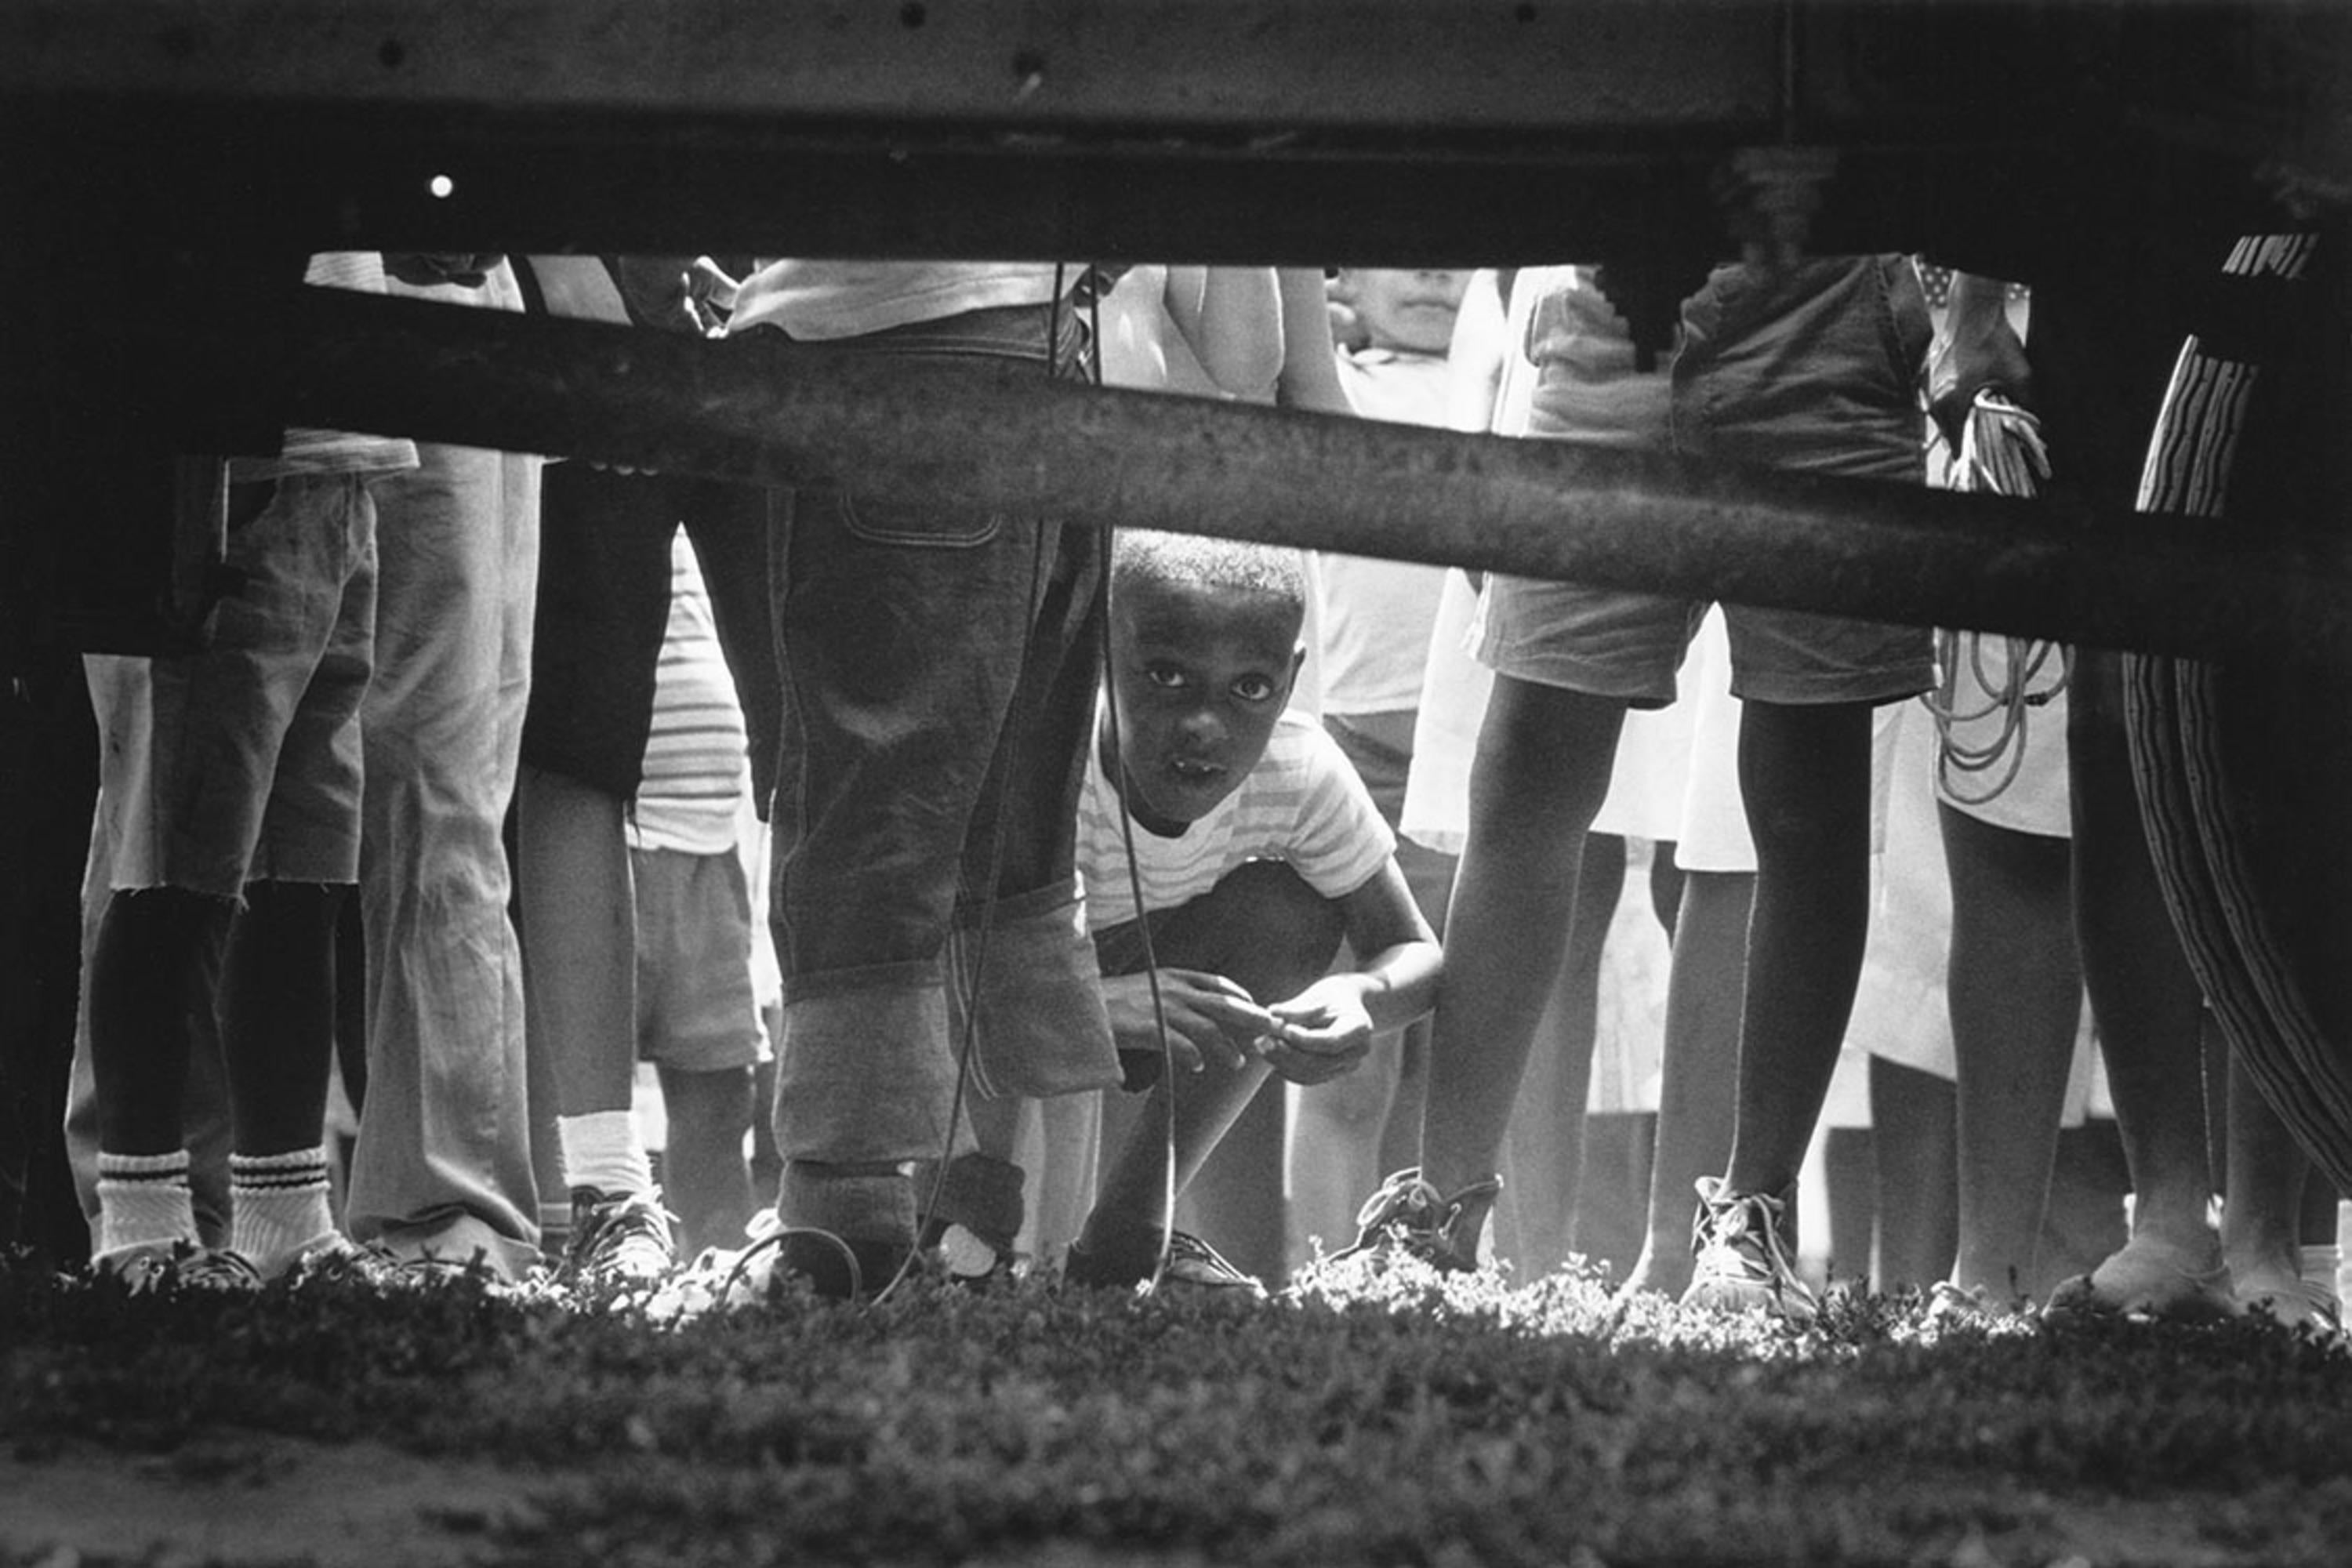 Ted Williams - Rally for Civil Rights’ at Soldier Field, IL, 1964, Printed After